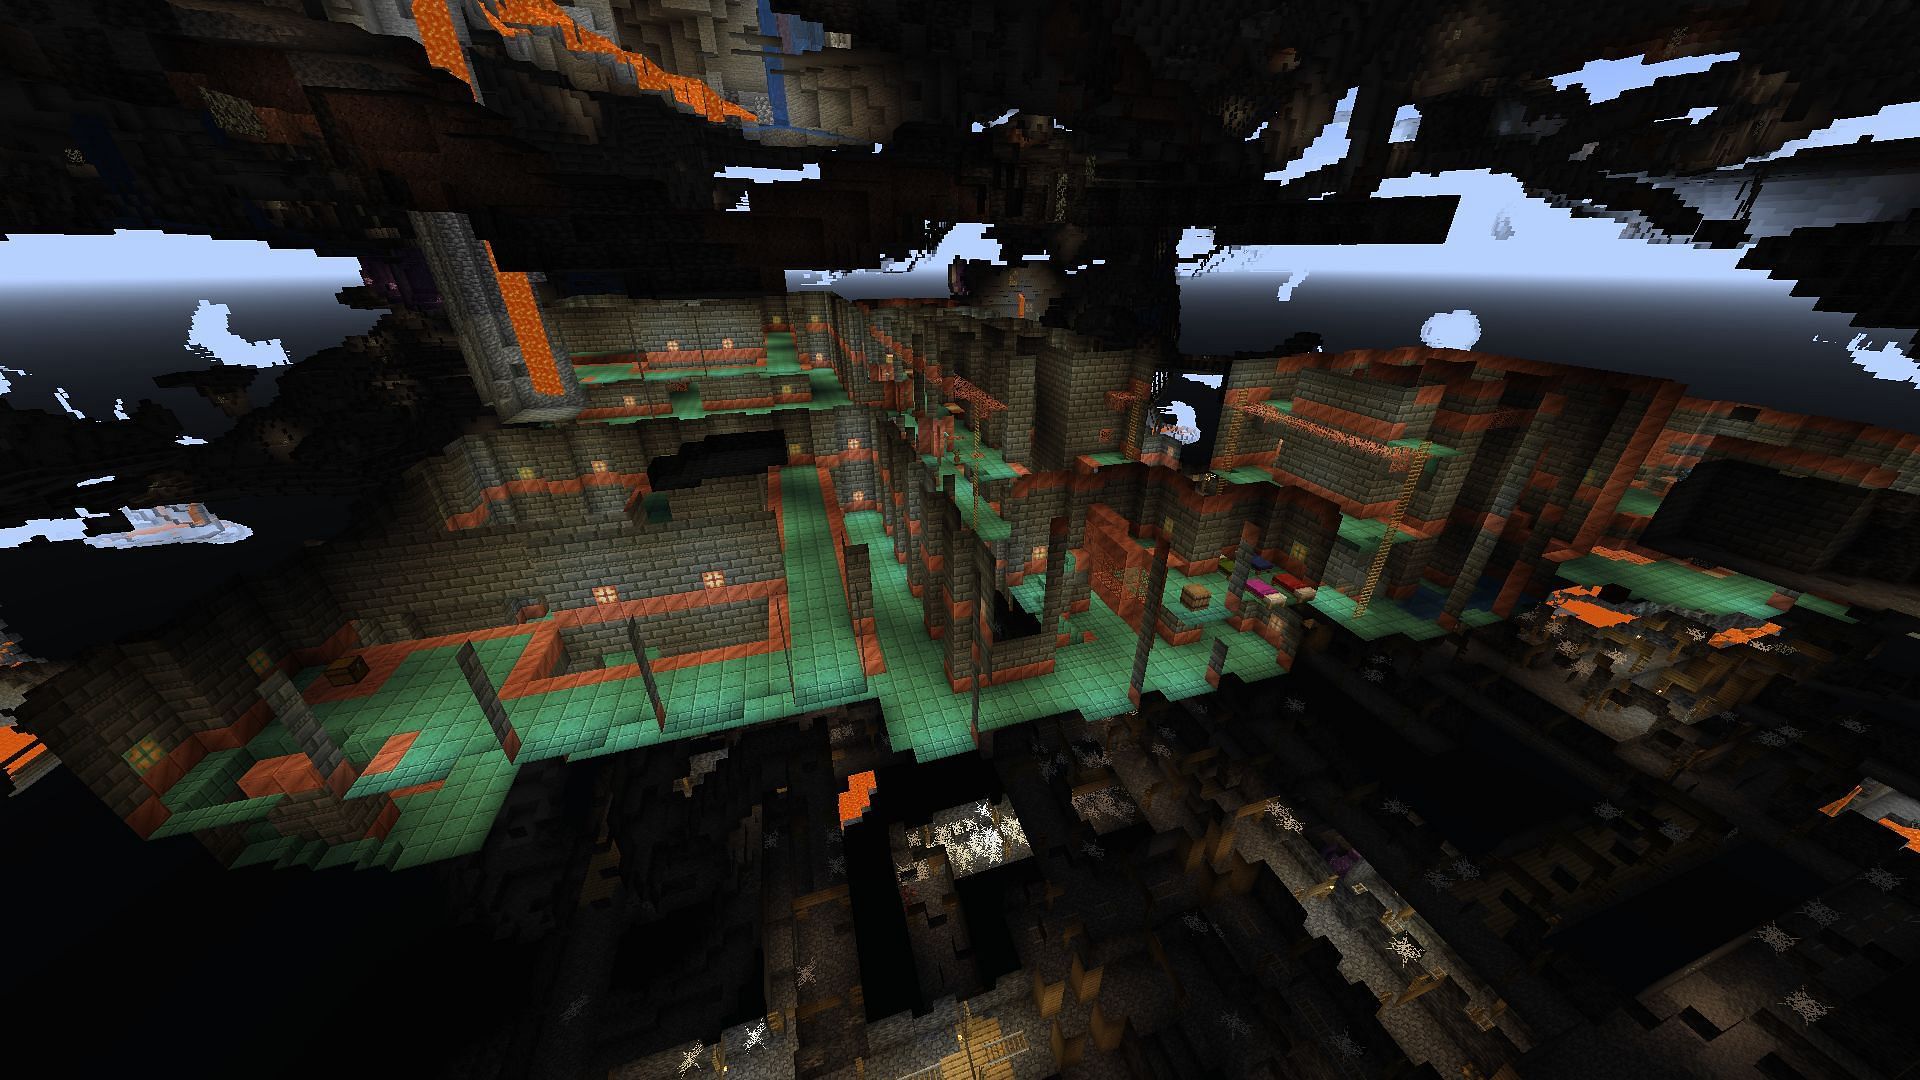 Trial chambers generate underground in the Overworld realm, anywhere below Y level -40 (Image via Mojang)